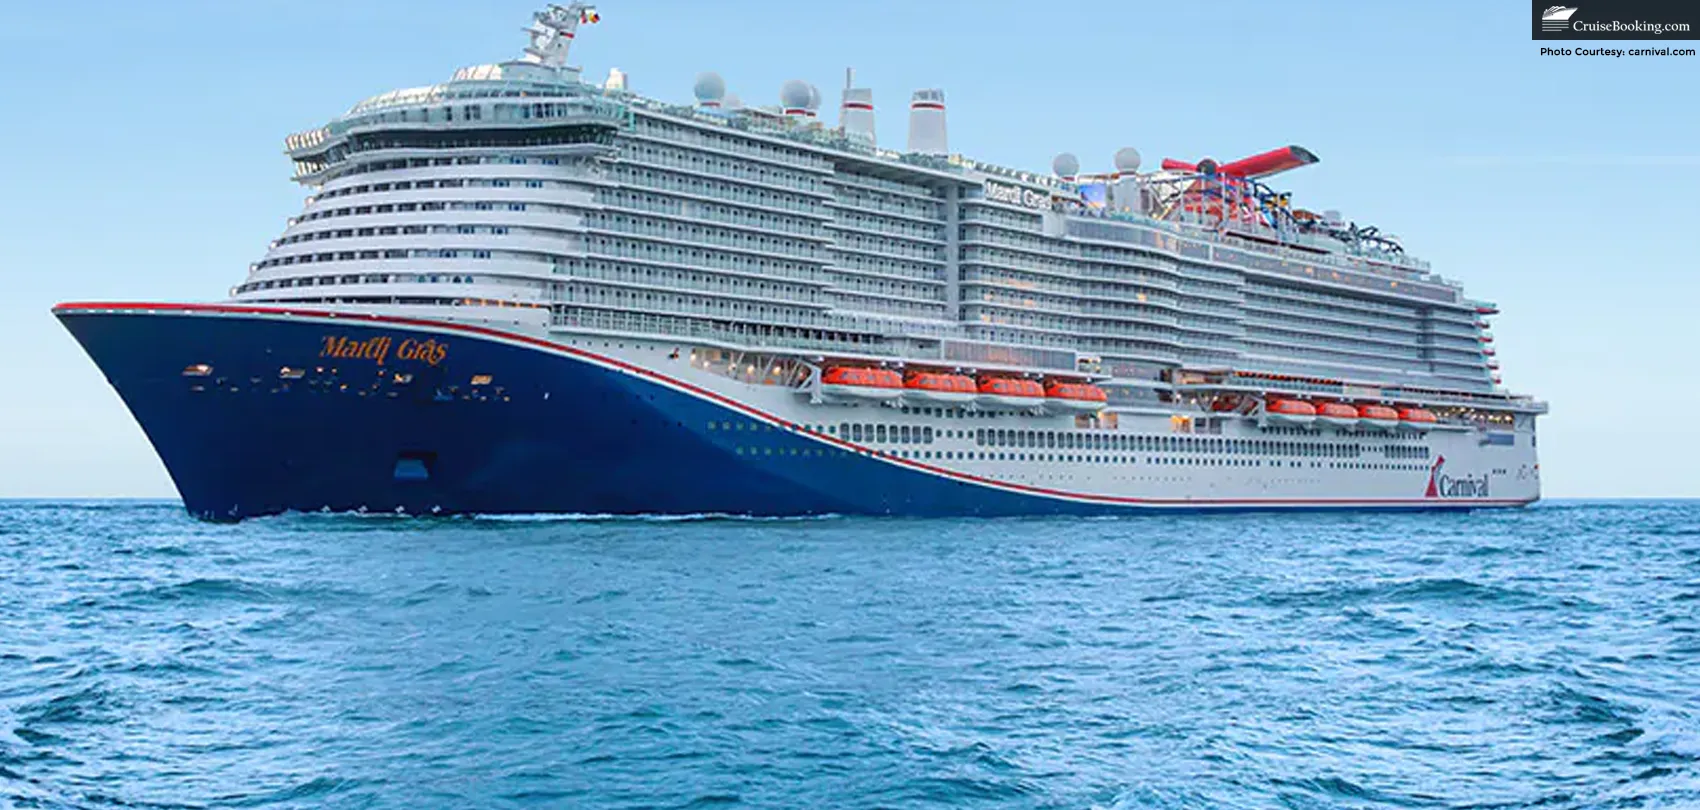 Environmental Ship Tour Video Launched by Carnival Cruise Line